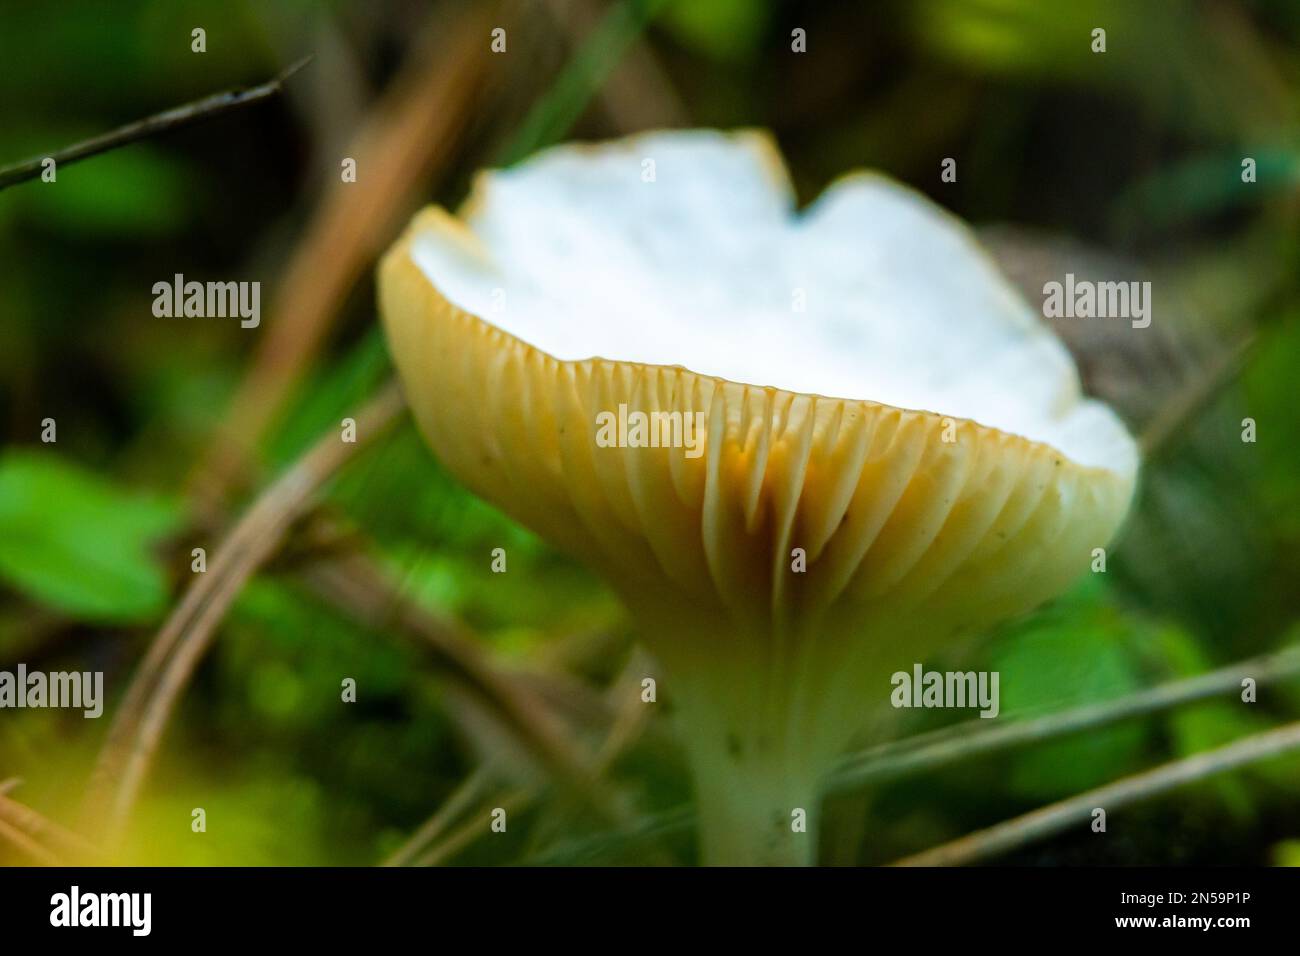 A closeup shot of Hygrophorus hypothejus mushroom in a forest Stock Photo